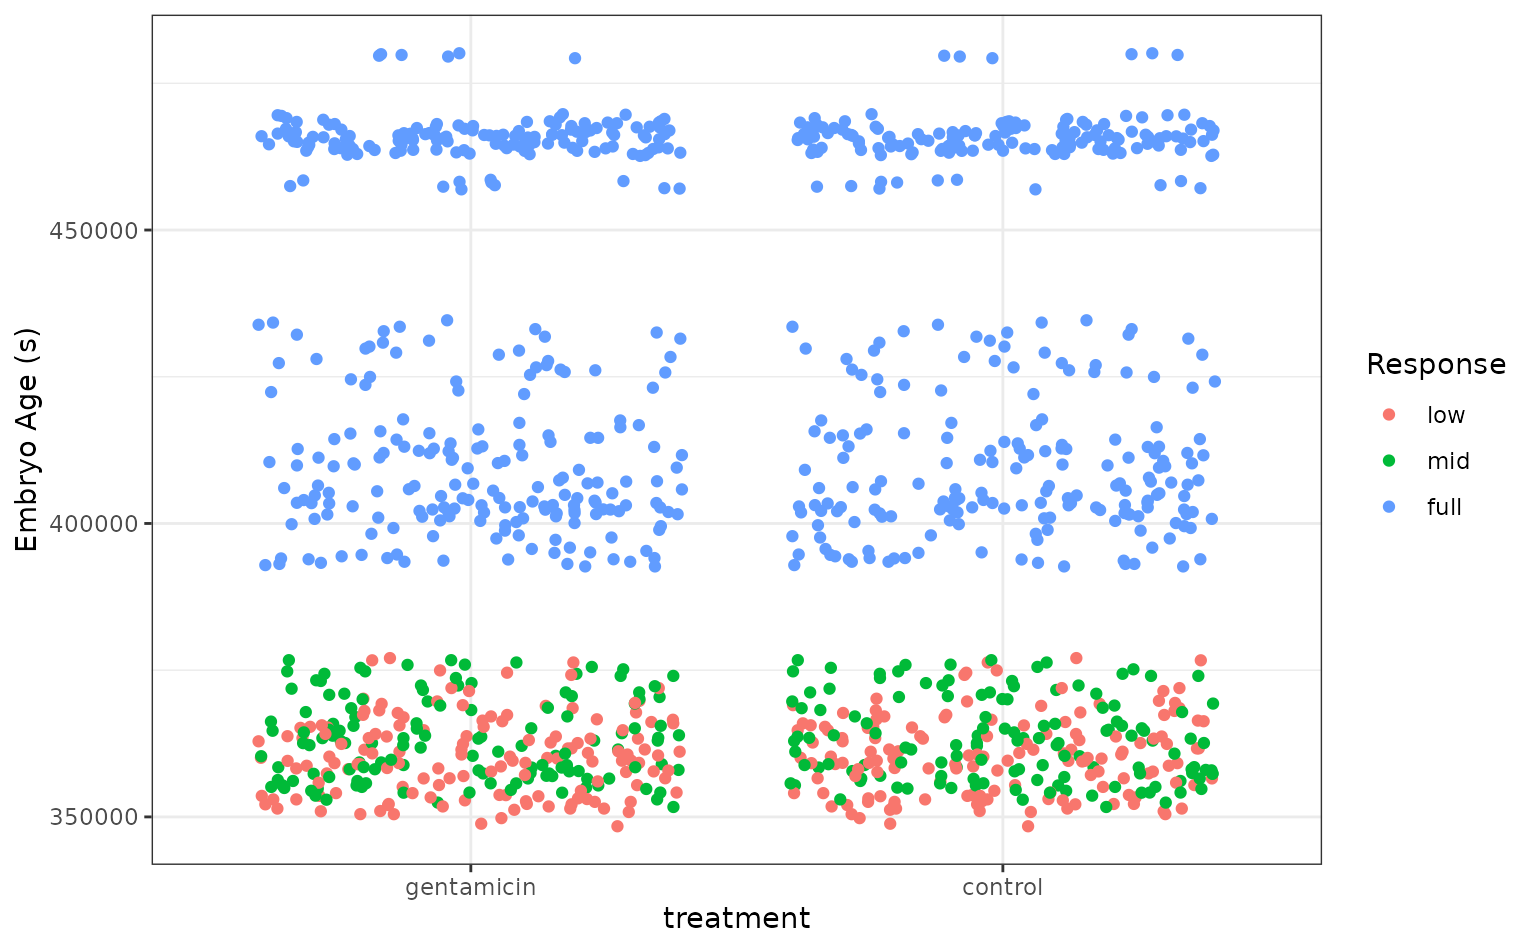 A ggplot scatterplot with categorical variable treatment, embryo age in seconds on the y axis, and points colored by response. The ages range from 350,000 to 500,000 seconds, and the two treatments are control and gentamicin. There are three responses: low, mid, and full. All of the embryos beyond a certain age have a full response, while the low and mid responses are well-intermixed regardless of age or treatment.